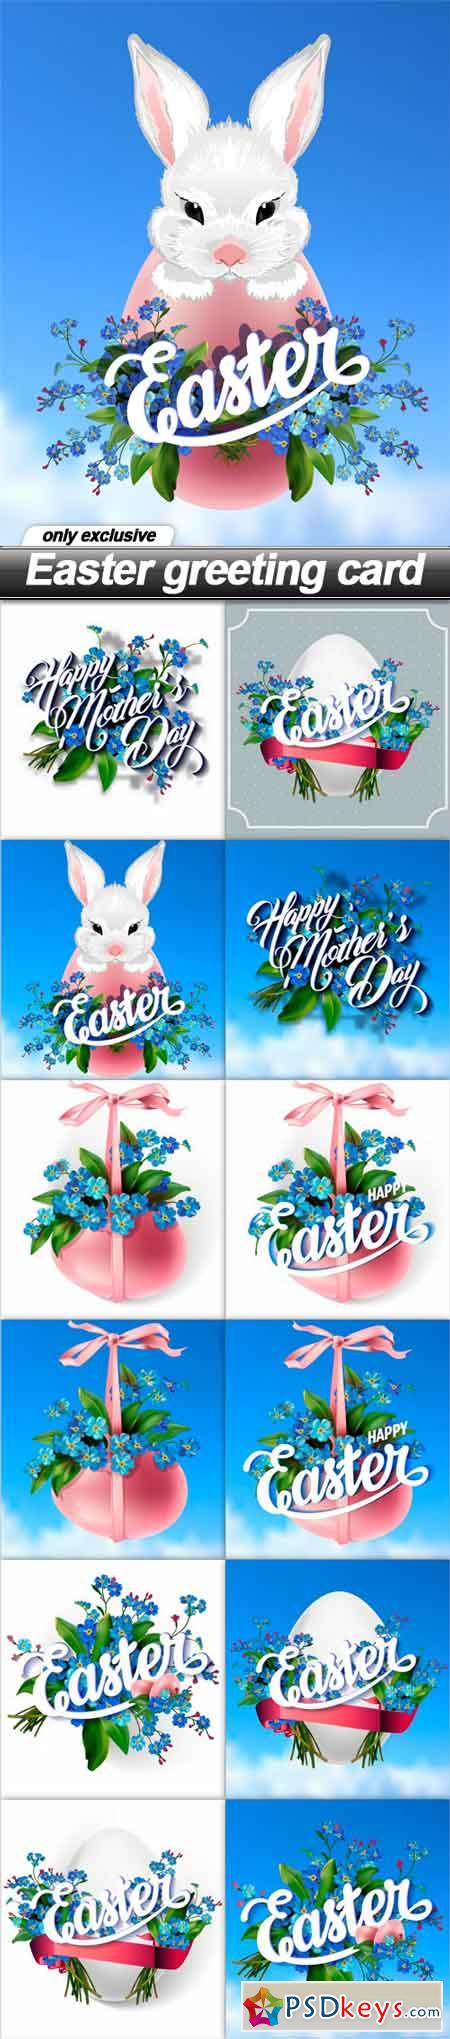 Easter greeting card - 12 EPS